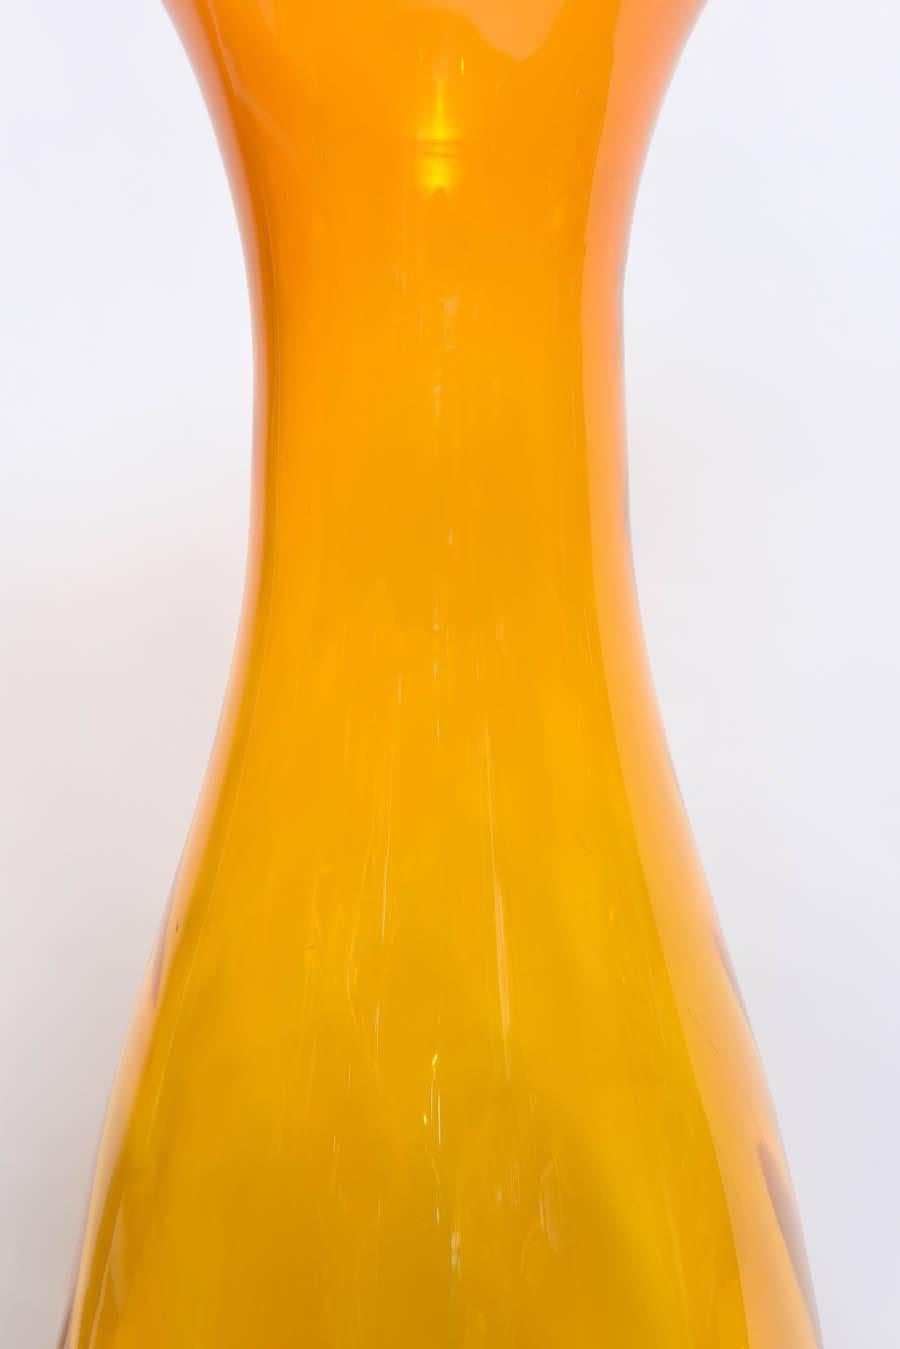 Hand-Crafted Mid-Century Modern Collectable Large Blenko Orange Glass Bottles For Sale